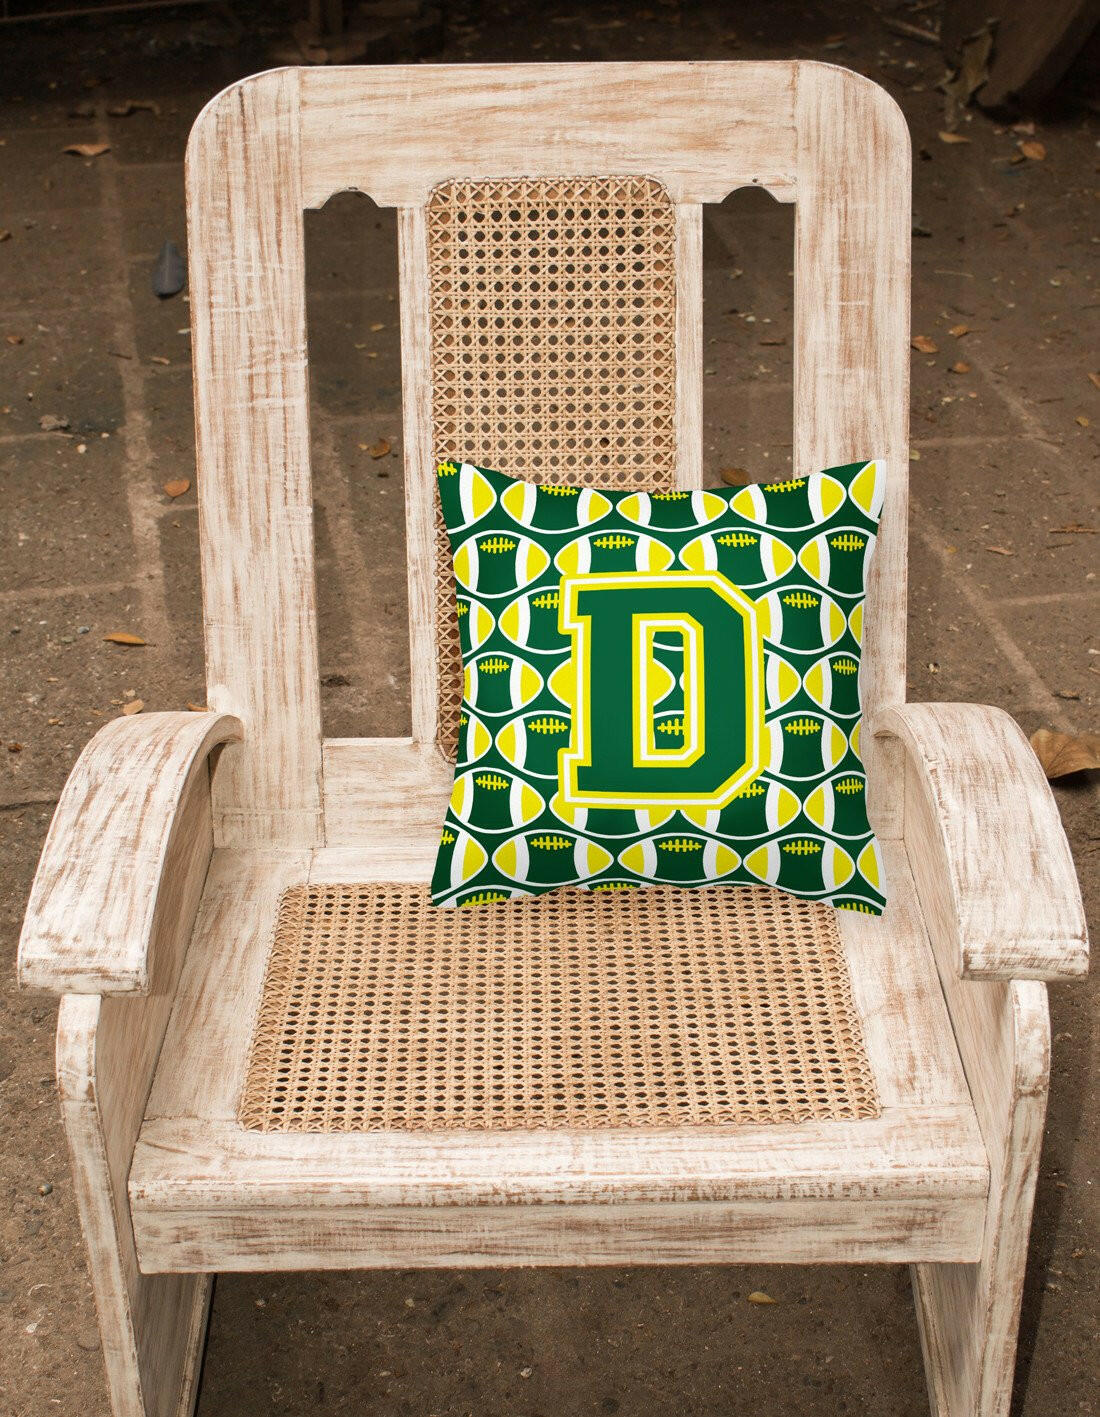 Letter D Football Green and Yellow Fabric Decorative Pillow CJ1075-DPW1414 by Caroline's Treasures